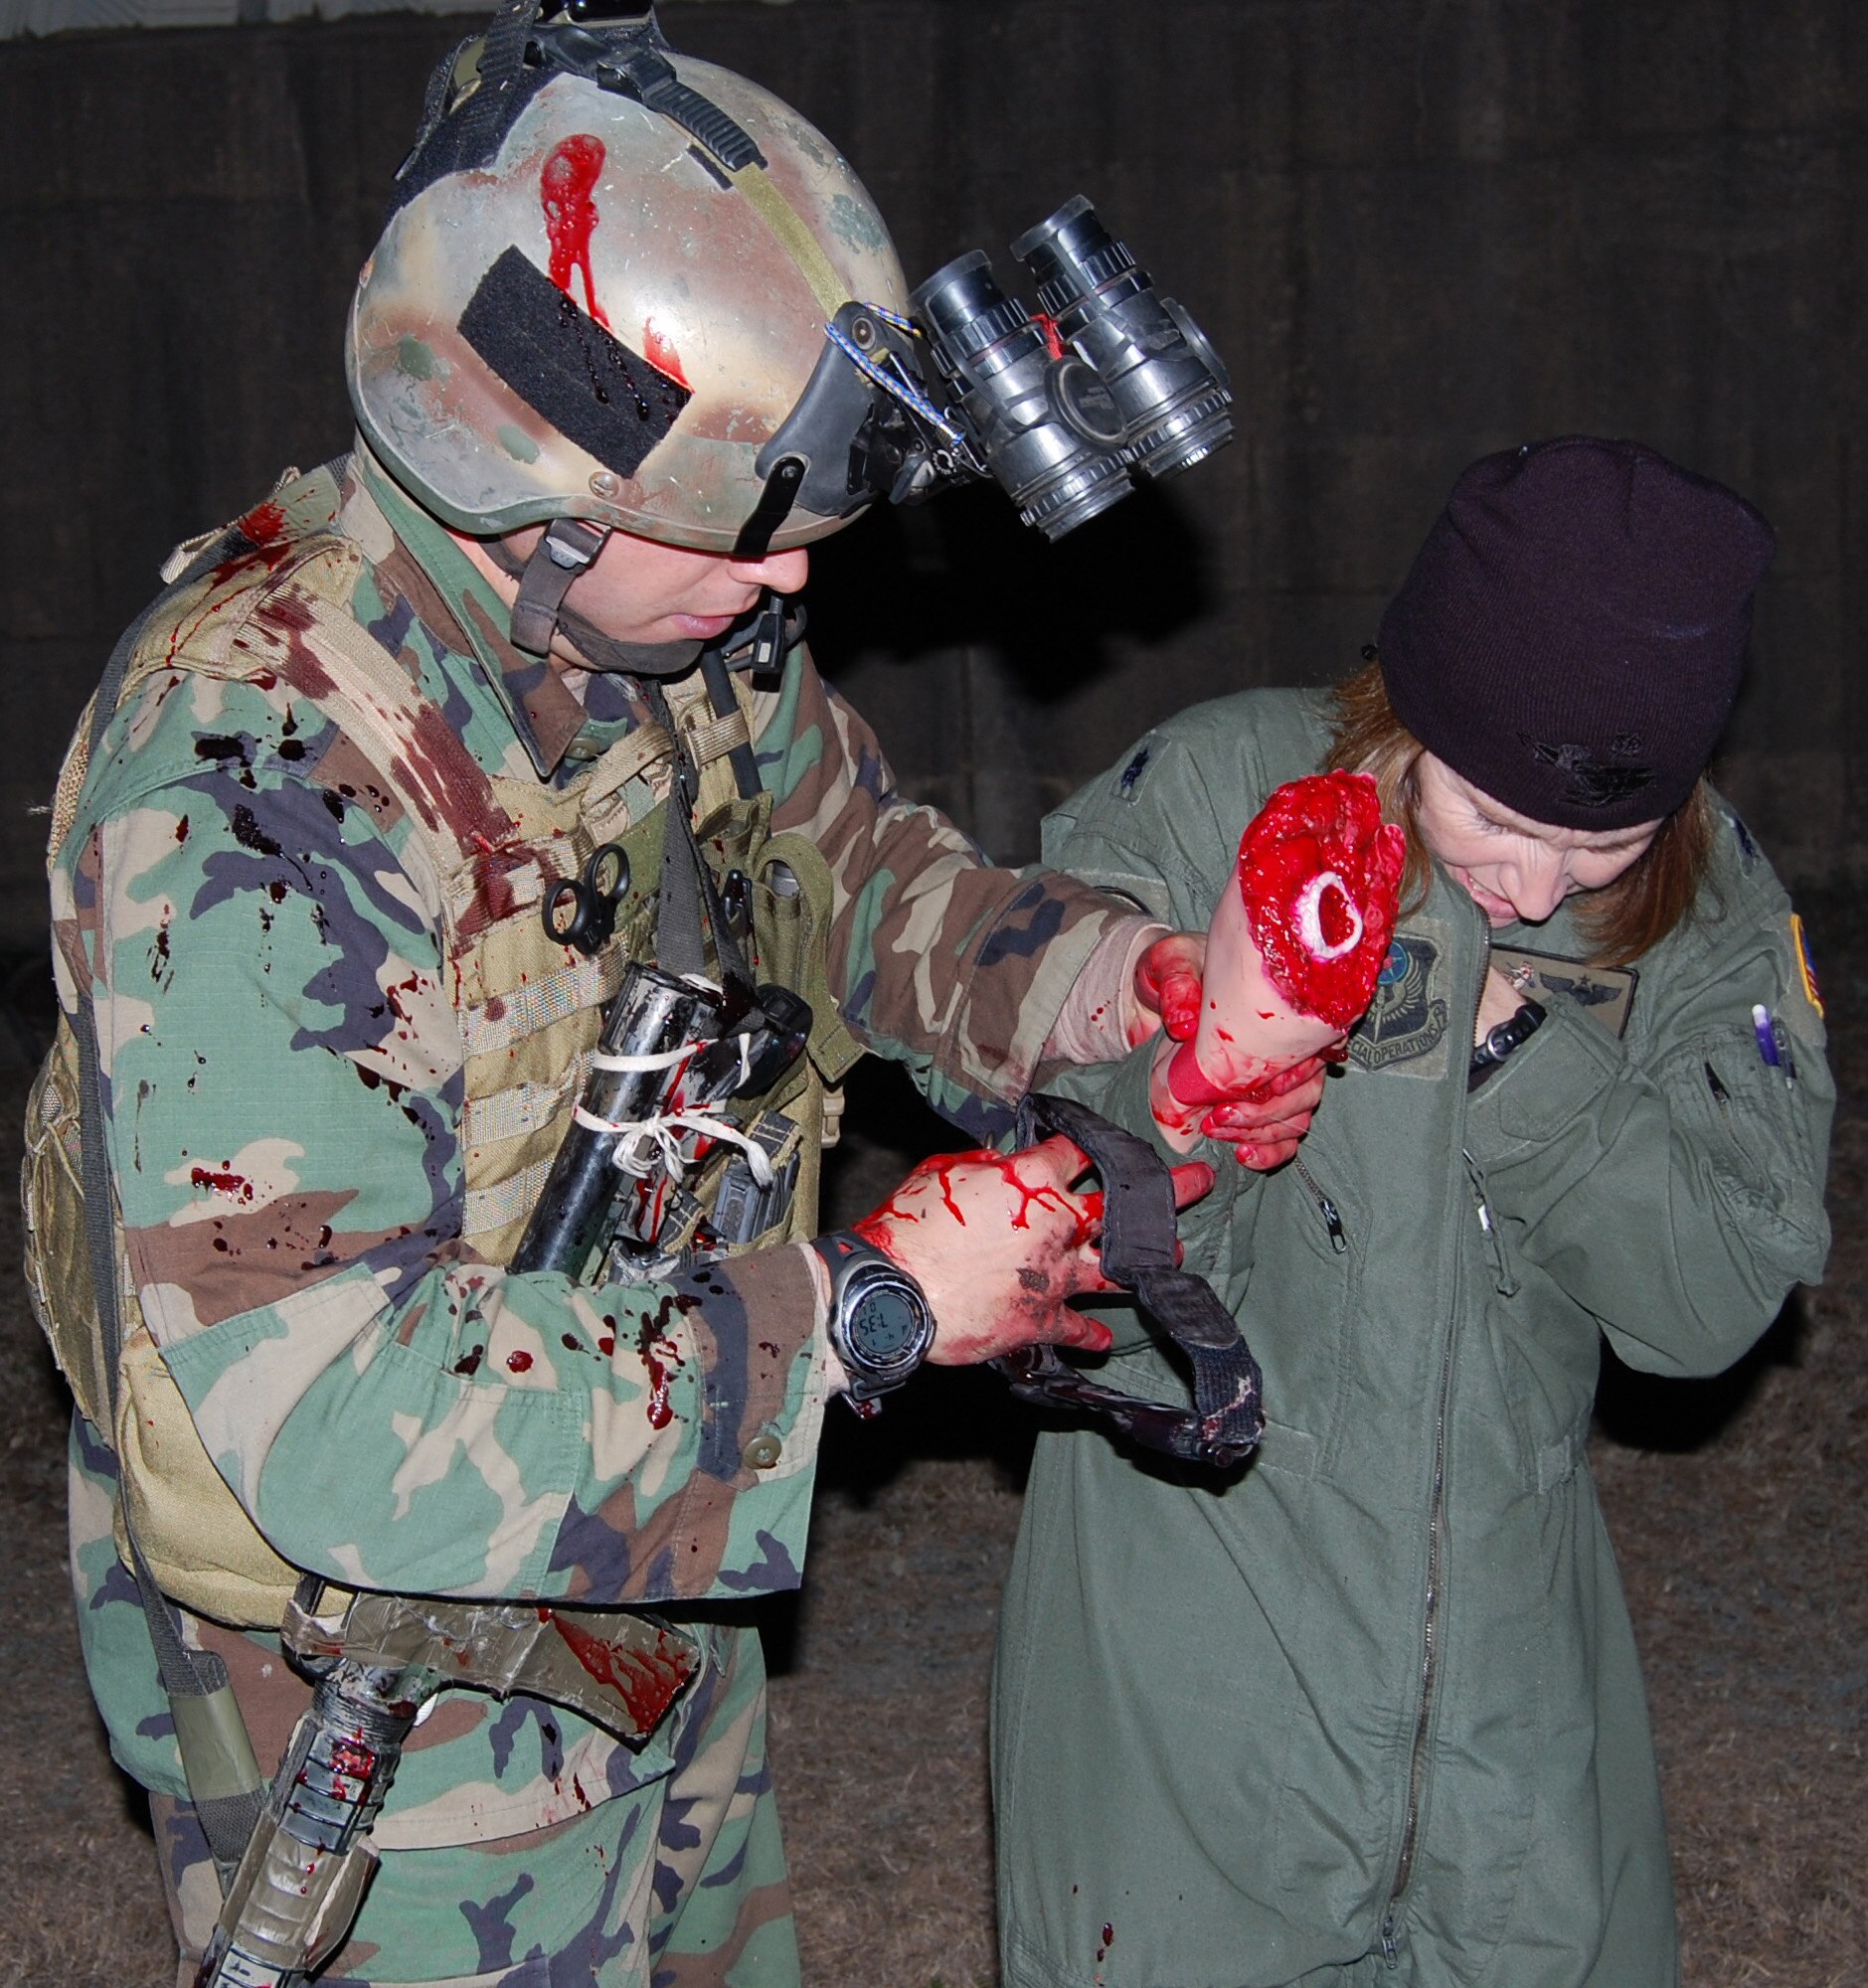 DAEGU AIR BASE, Republic of Korea -- A pararescueman from the 320th Special Tactics Squadron prepares to put a tourniquet on Lt. Col. Leslie Babich, 353rd Operations Support Squadron, to stop the bleeding from a simulated wound during a mass casualty exercise here April 1. More than 350 members and several aircraft assigned to the 353rd Special Operations Group spent nearly a month at Daegu Air Base, Republic of Korea, testing and assessing their wartime skills necessary to survive and operate in any environment. (U.S. Air Force photo by James D'Angina)